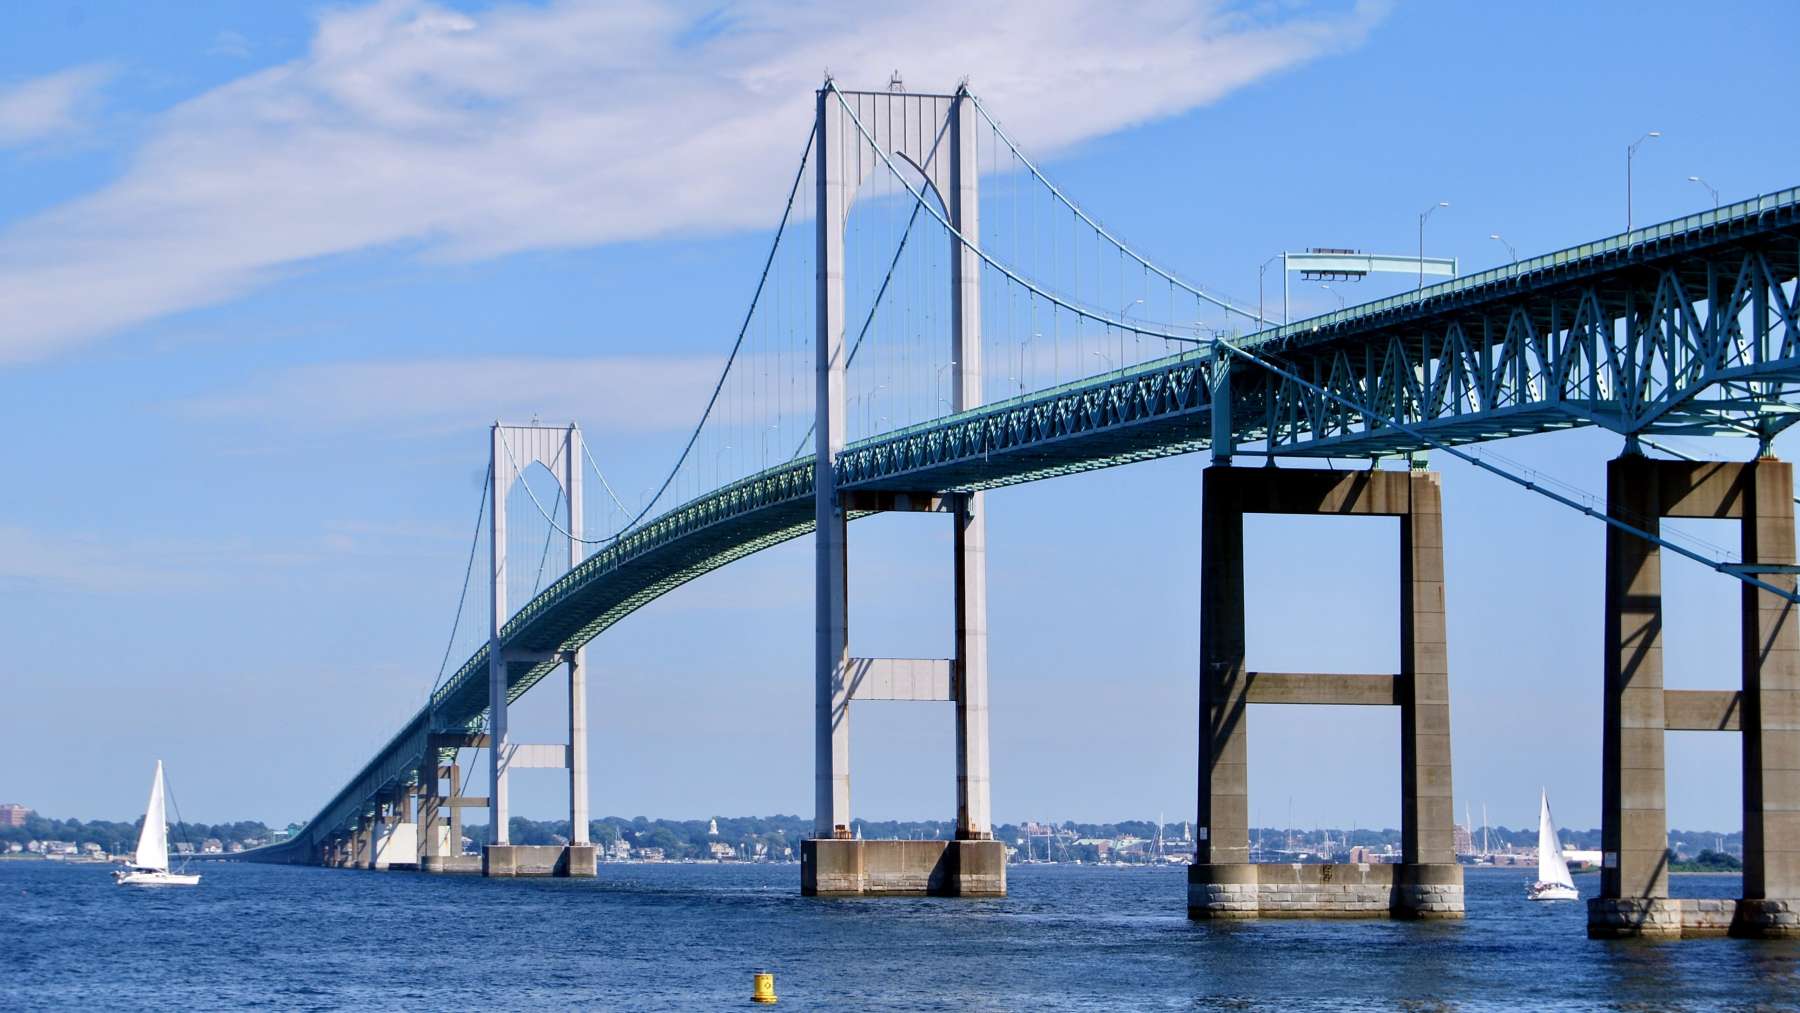 Rhode Island News: Jameson Boyd: Cashless businesses are illegal for retailers in RI, so why is the Newport Bridge an exception?